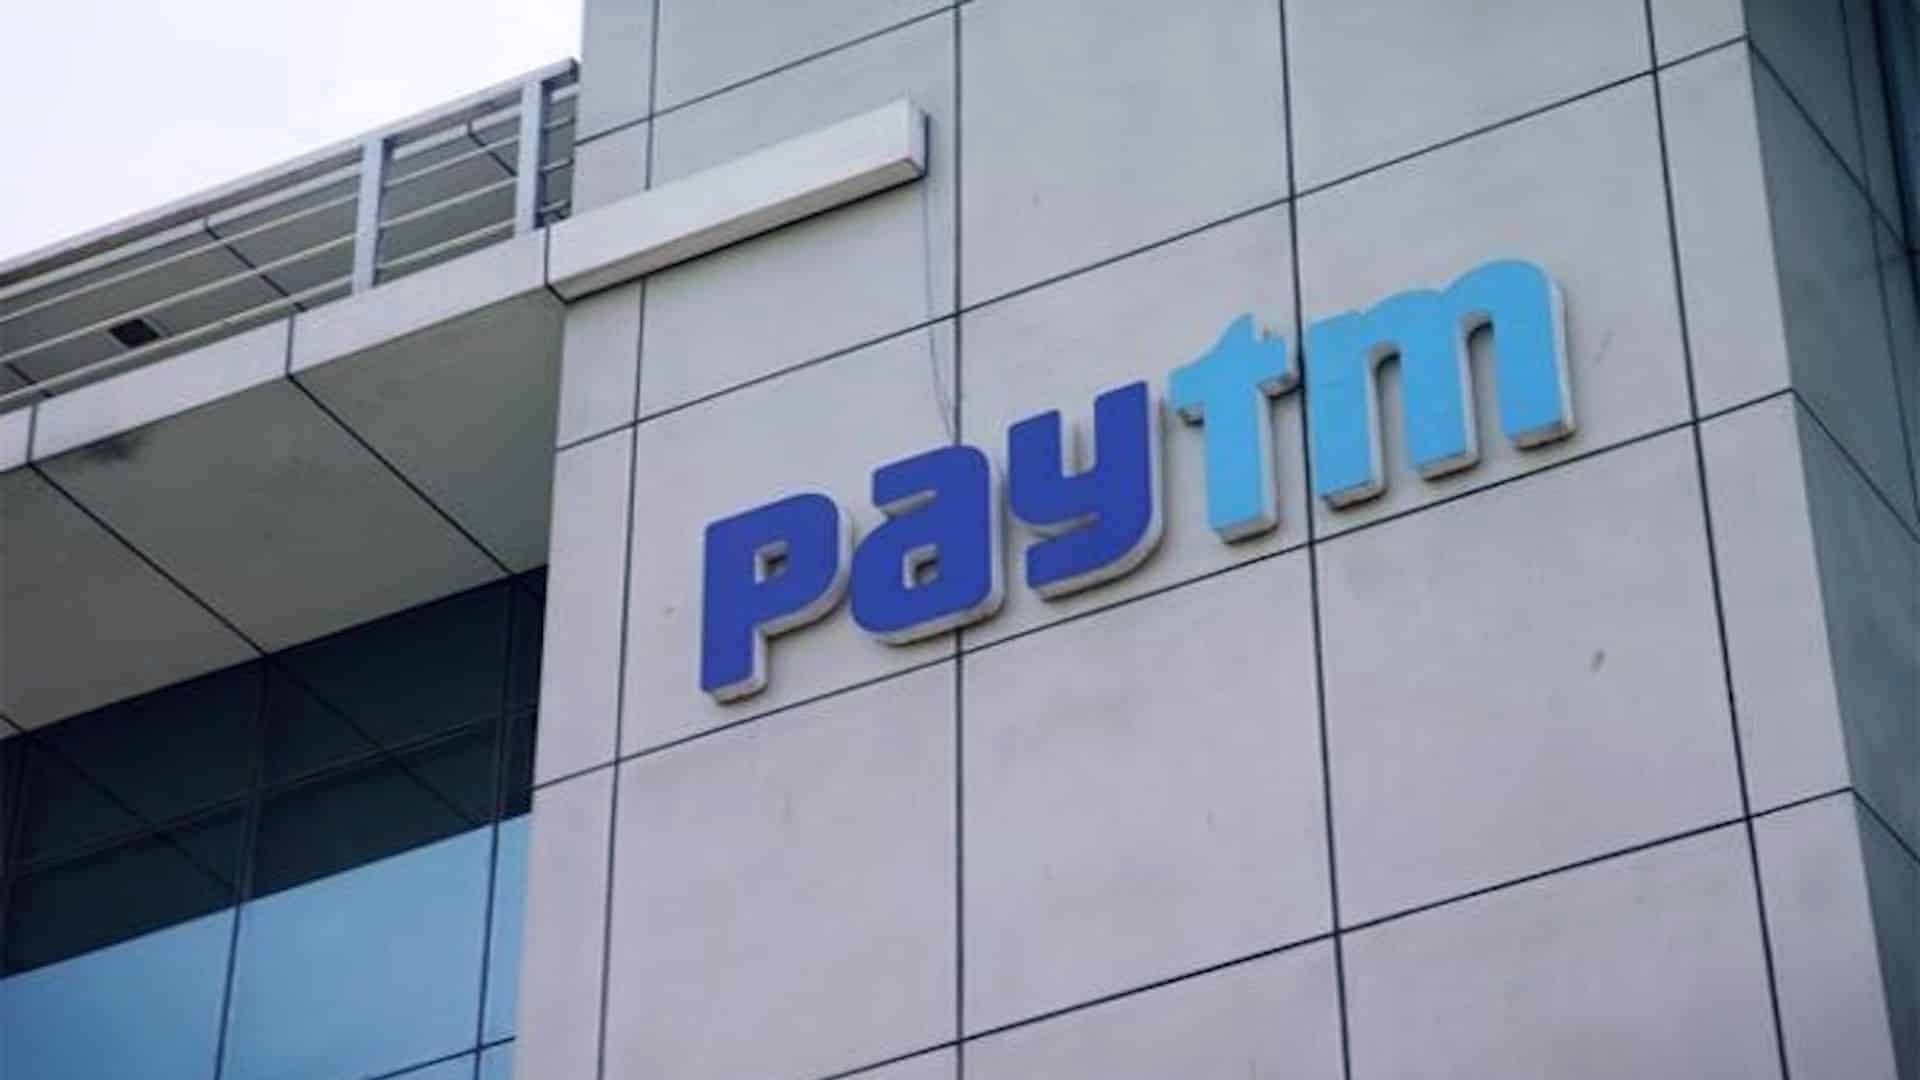 Paytm announces launch of its upgraded payments platform powered by 100% indigenous technology — a shining example of ‘Make in India’